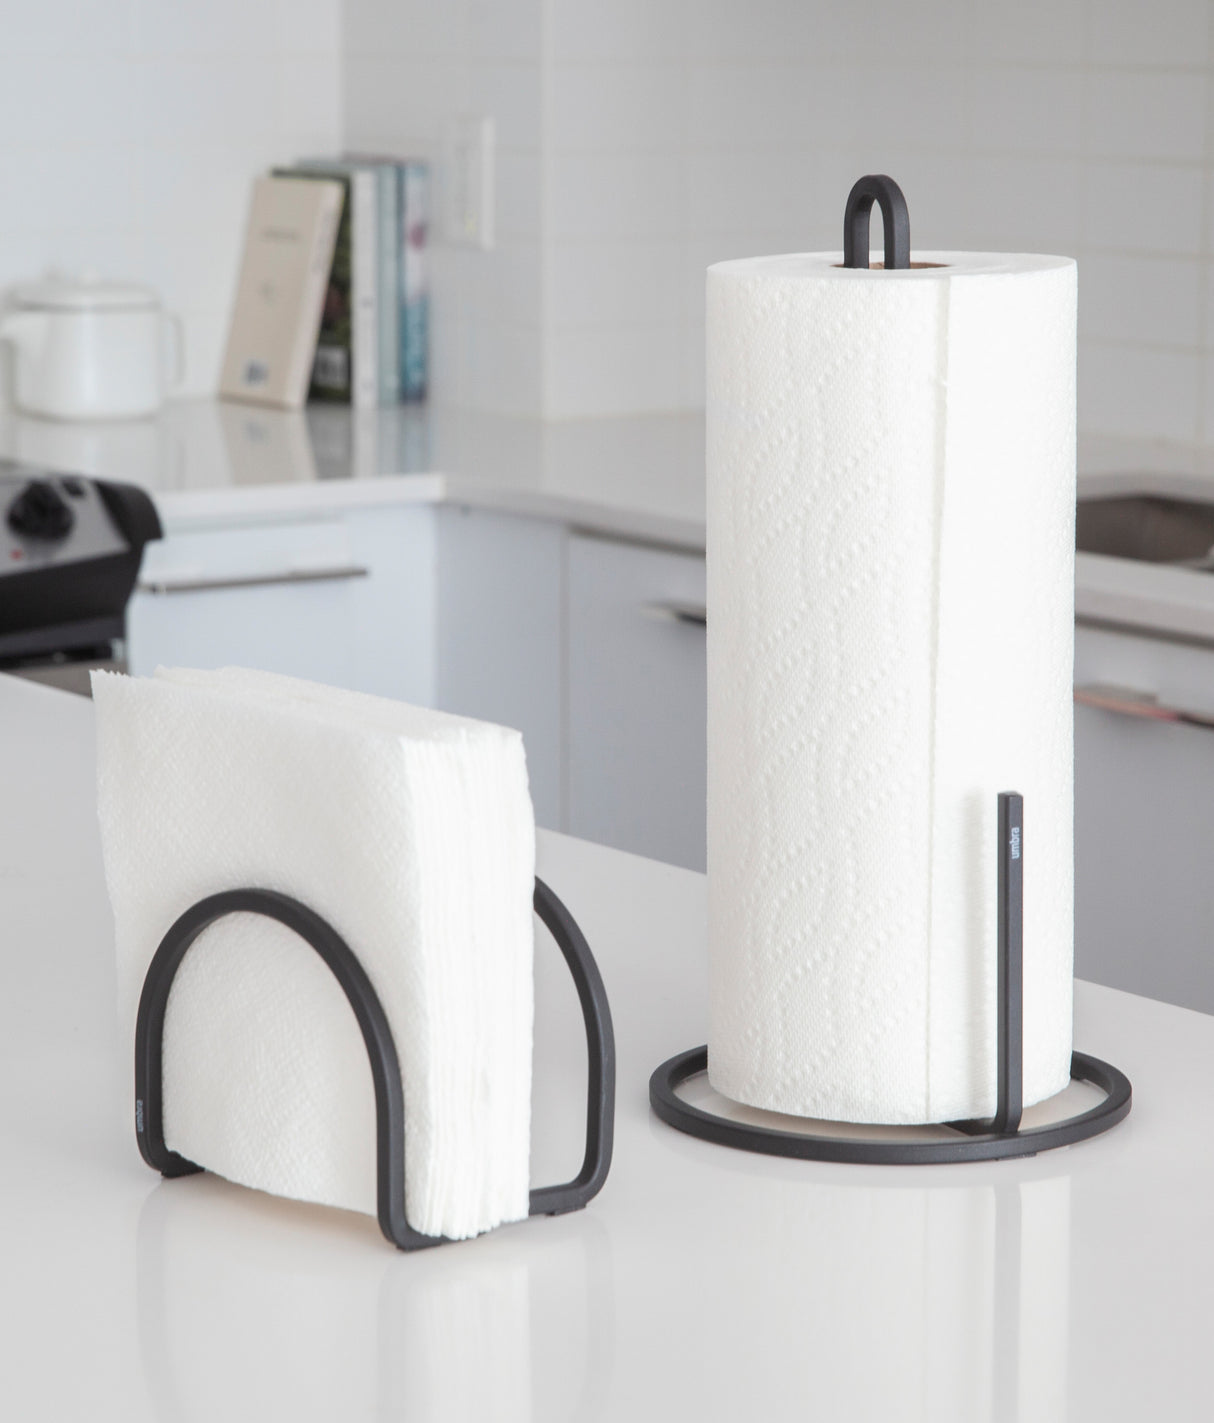 1pc Nordic Style Metal Iron Tissue Holder Standing Napkin Holder For  Kitchen Paper Towel